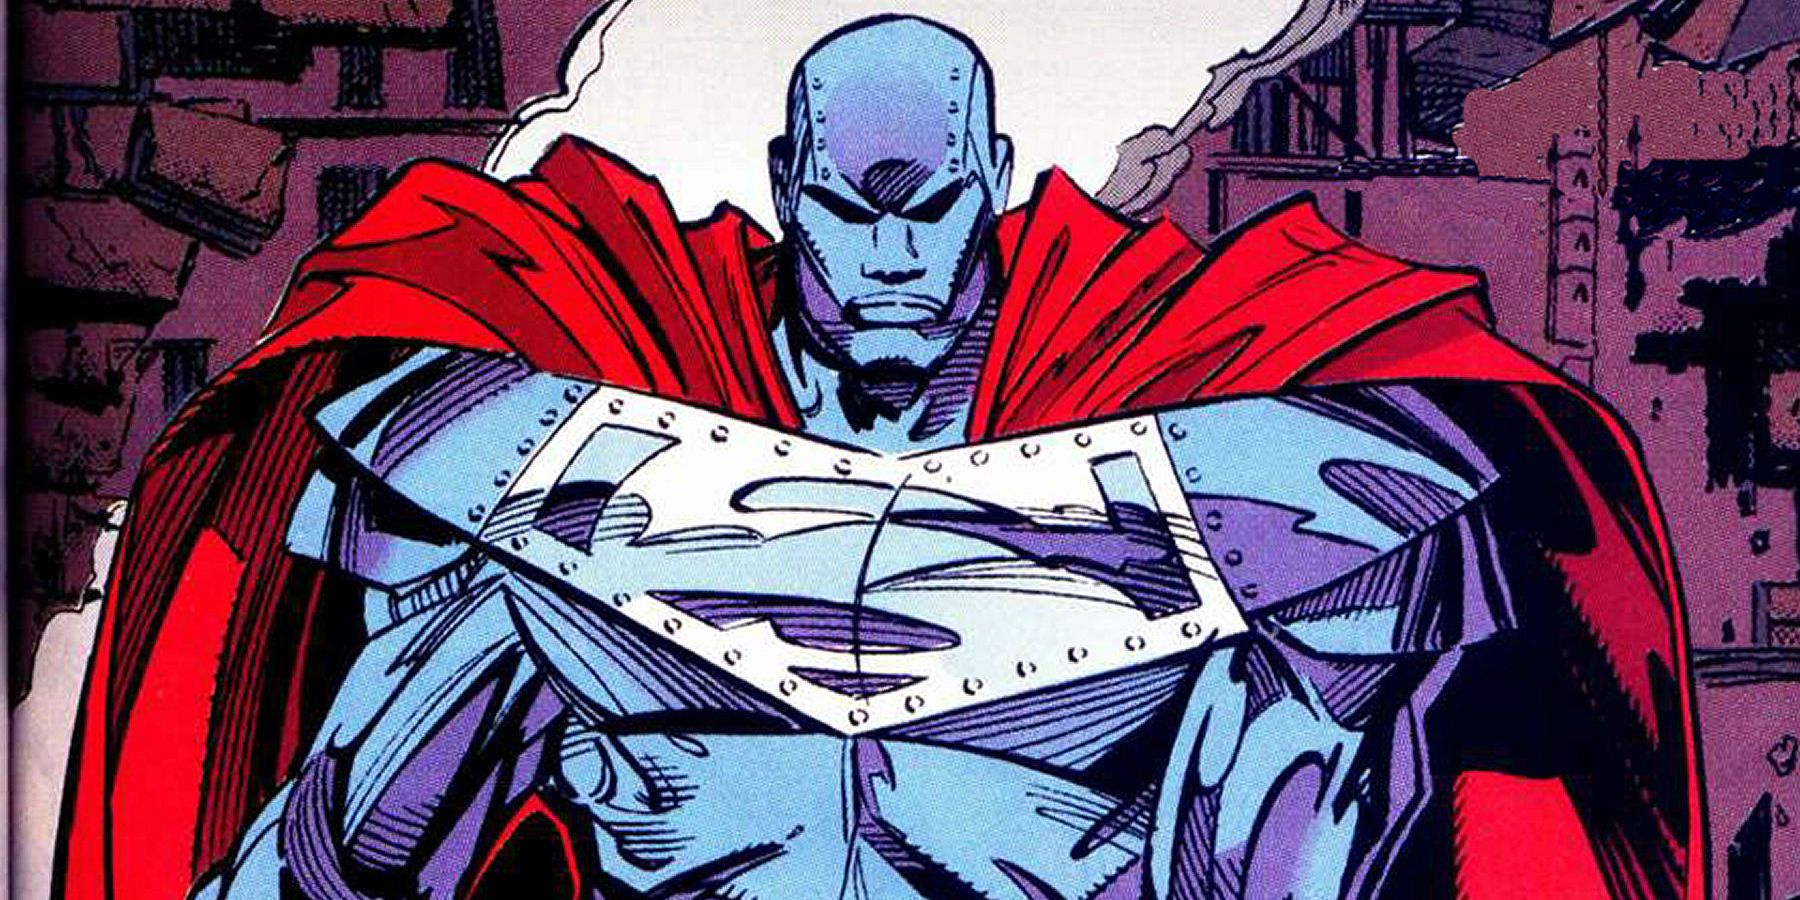 Steel appears in his armor from DC Comics.